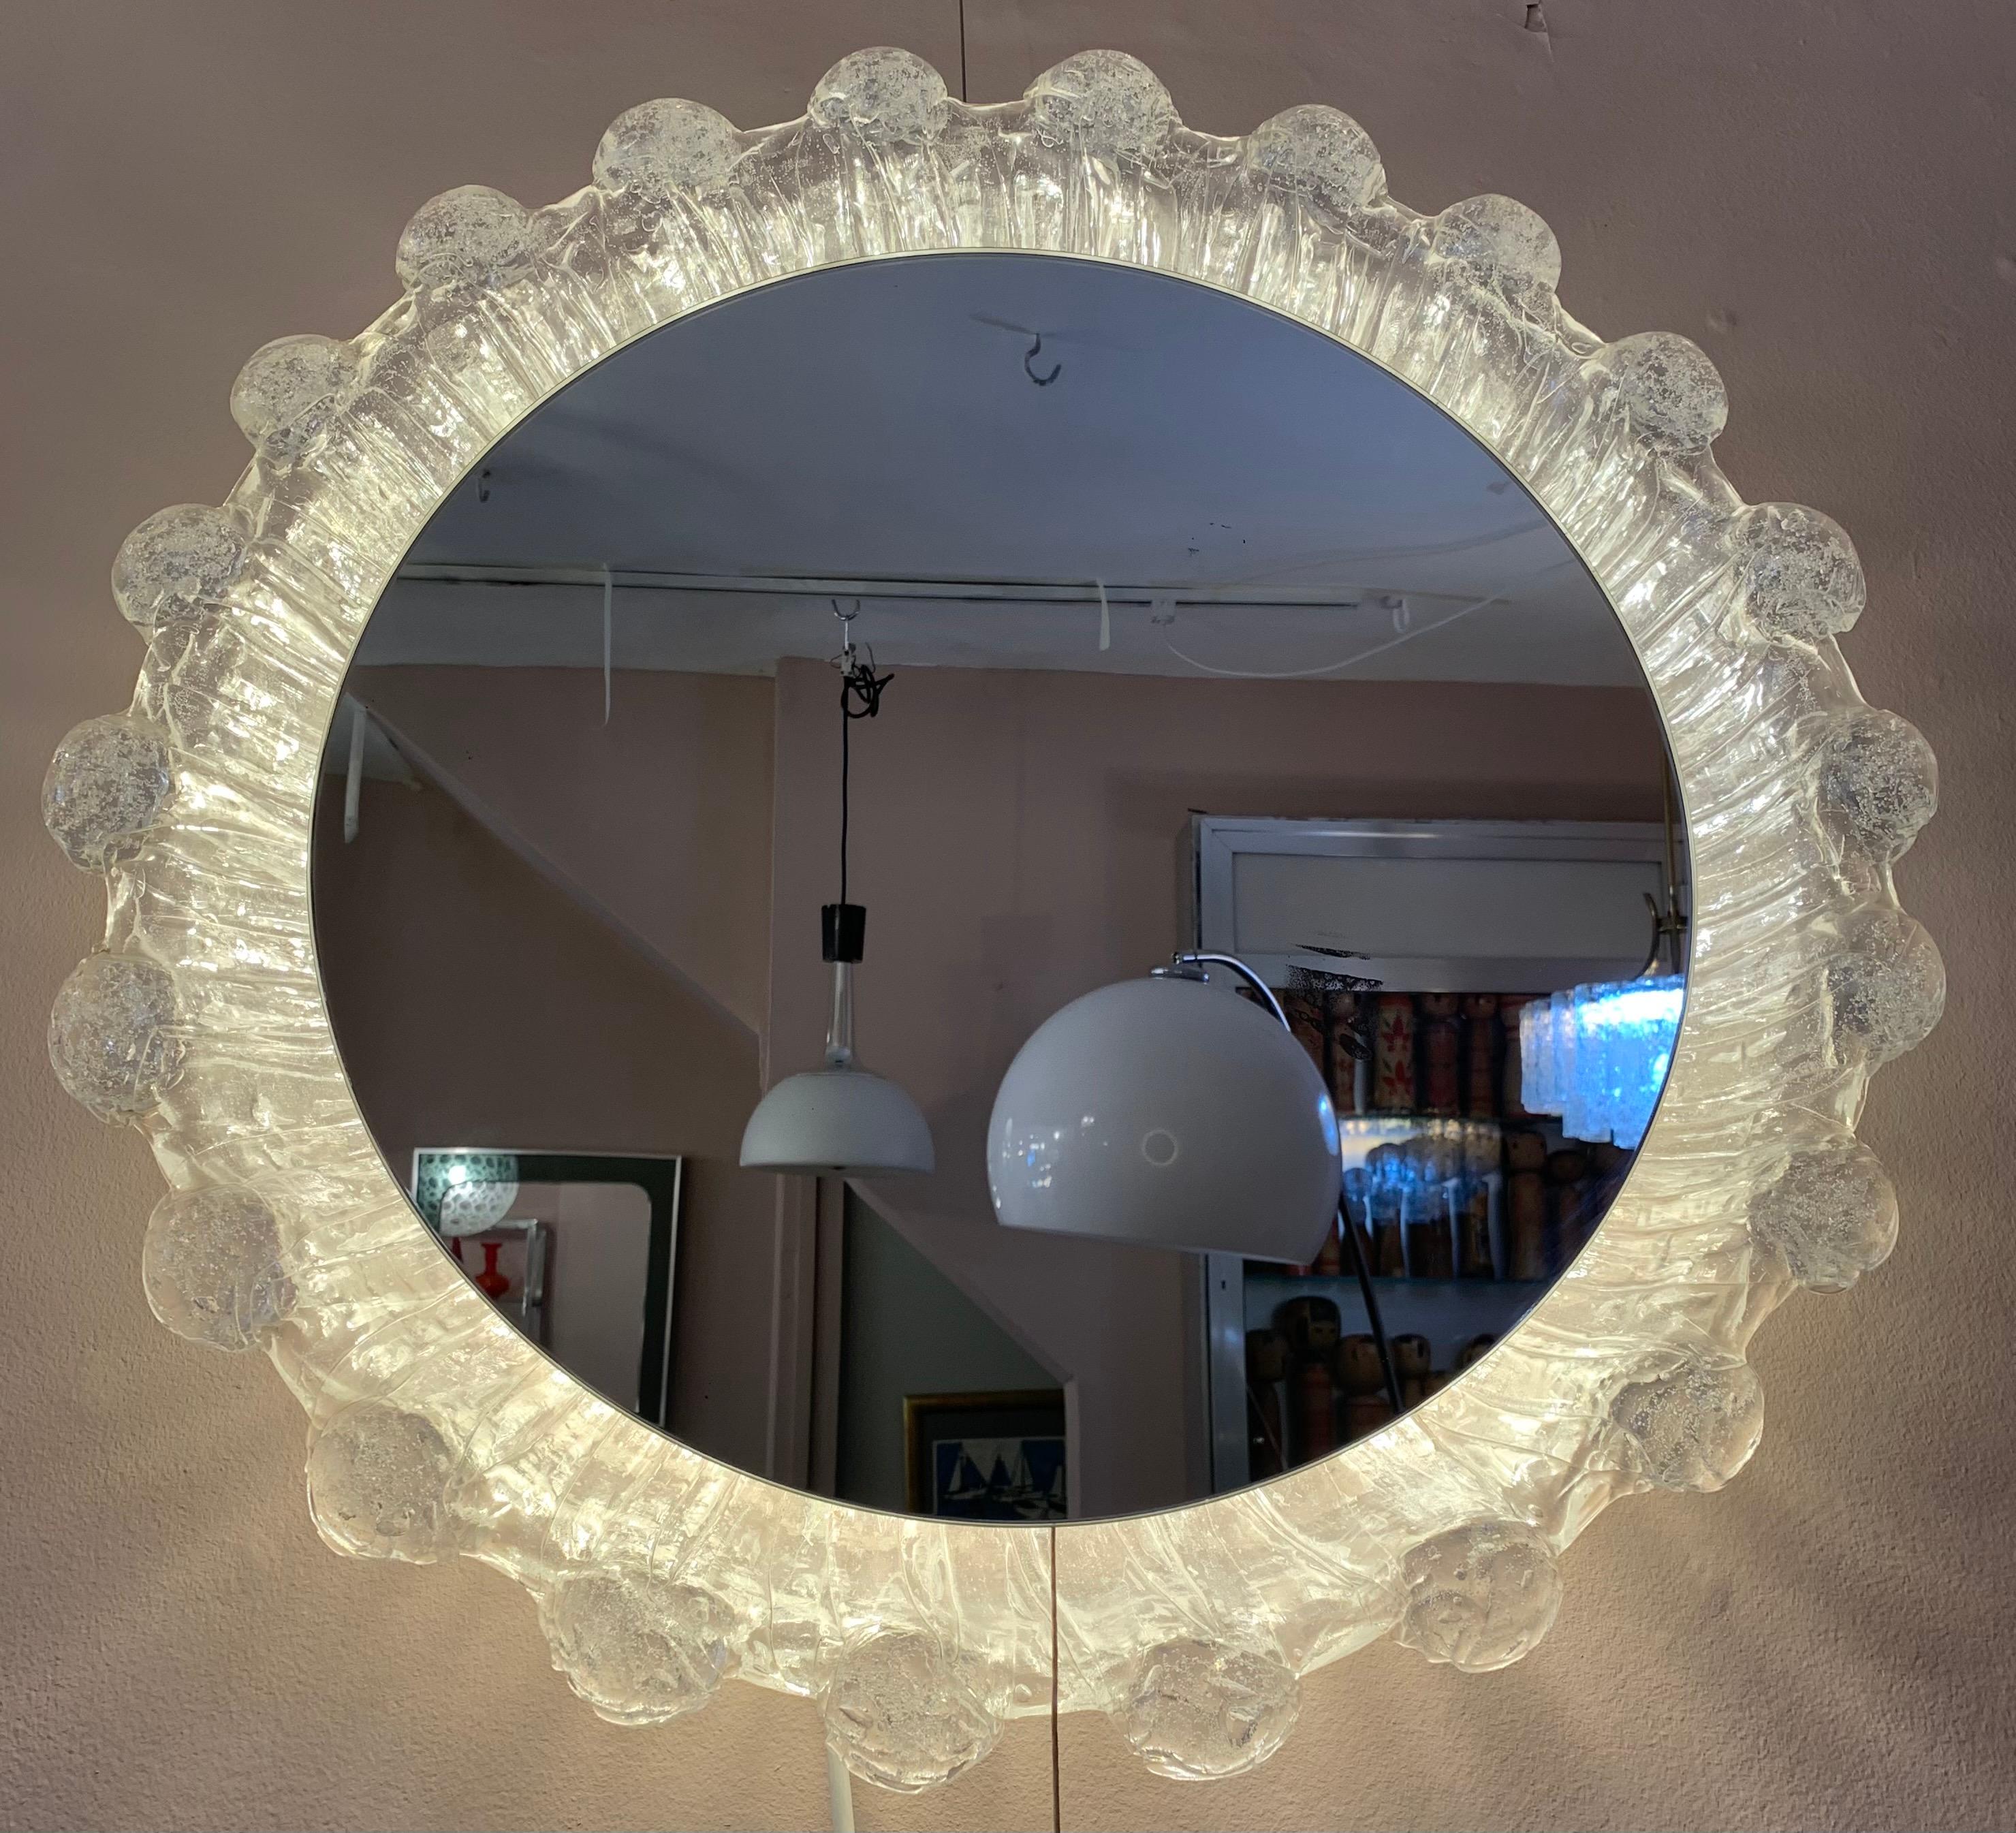 Vintage 1970s German, illuminated, back-lit, wall mirror formed from a lucite glass mottled frame in the shape of a water droplet. Manufactured by Miradur-Werk, Dusseldorf. The manufacturers label is still visible on the frame. The round mirror